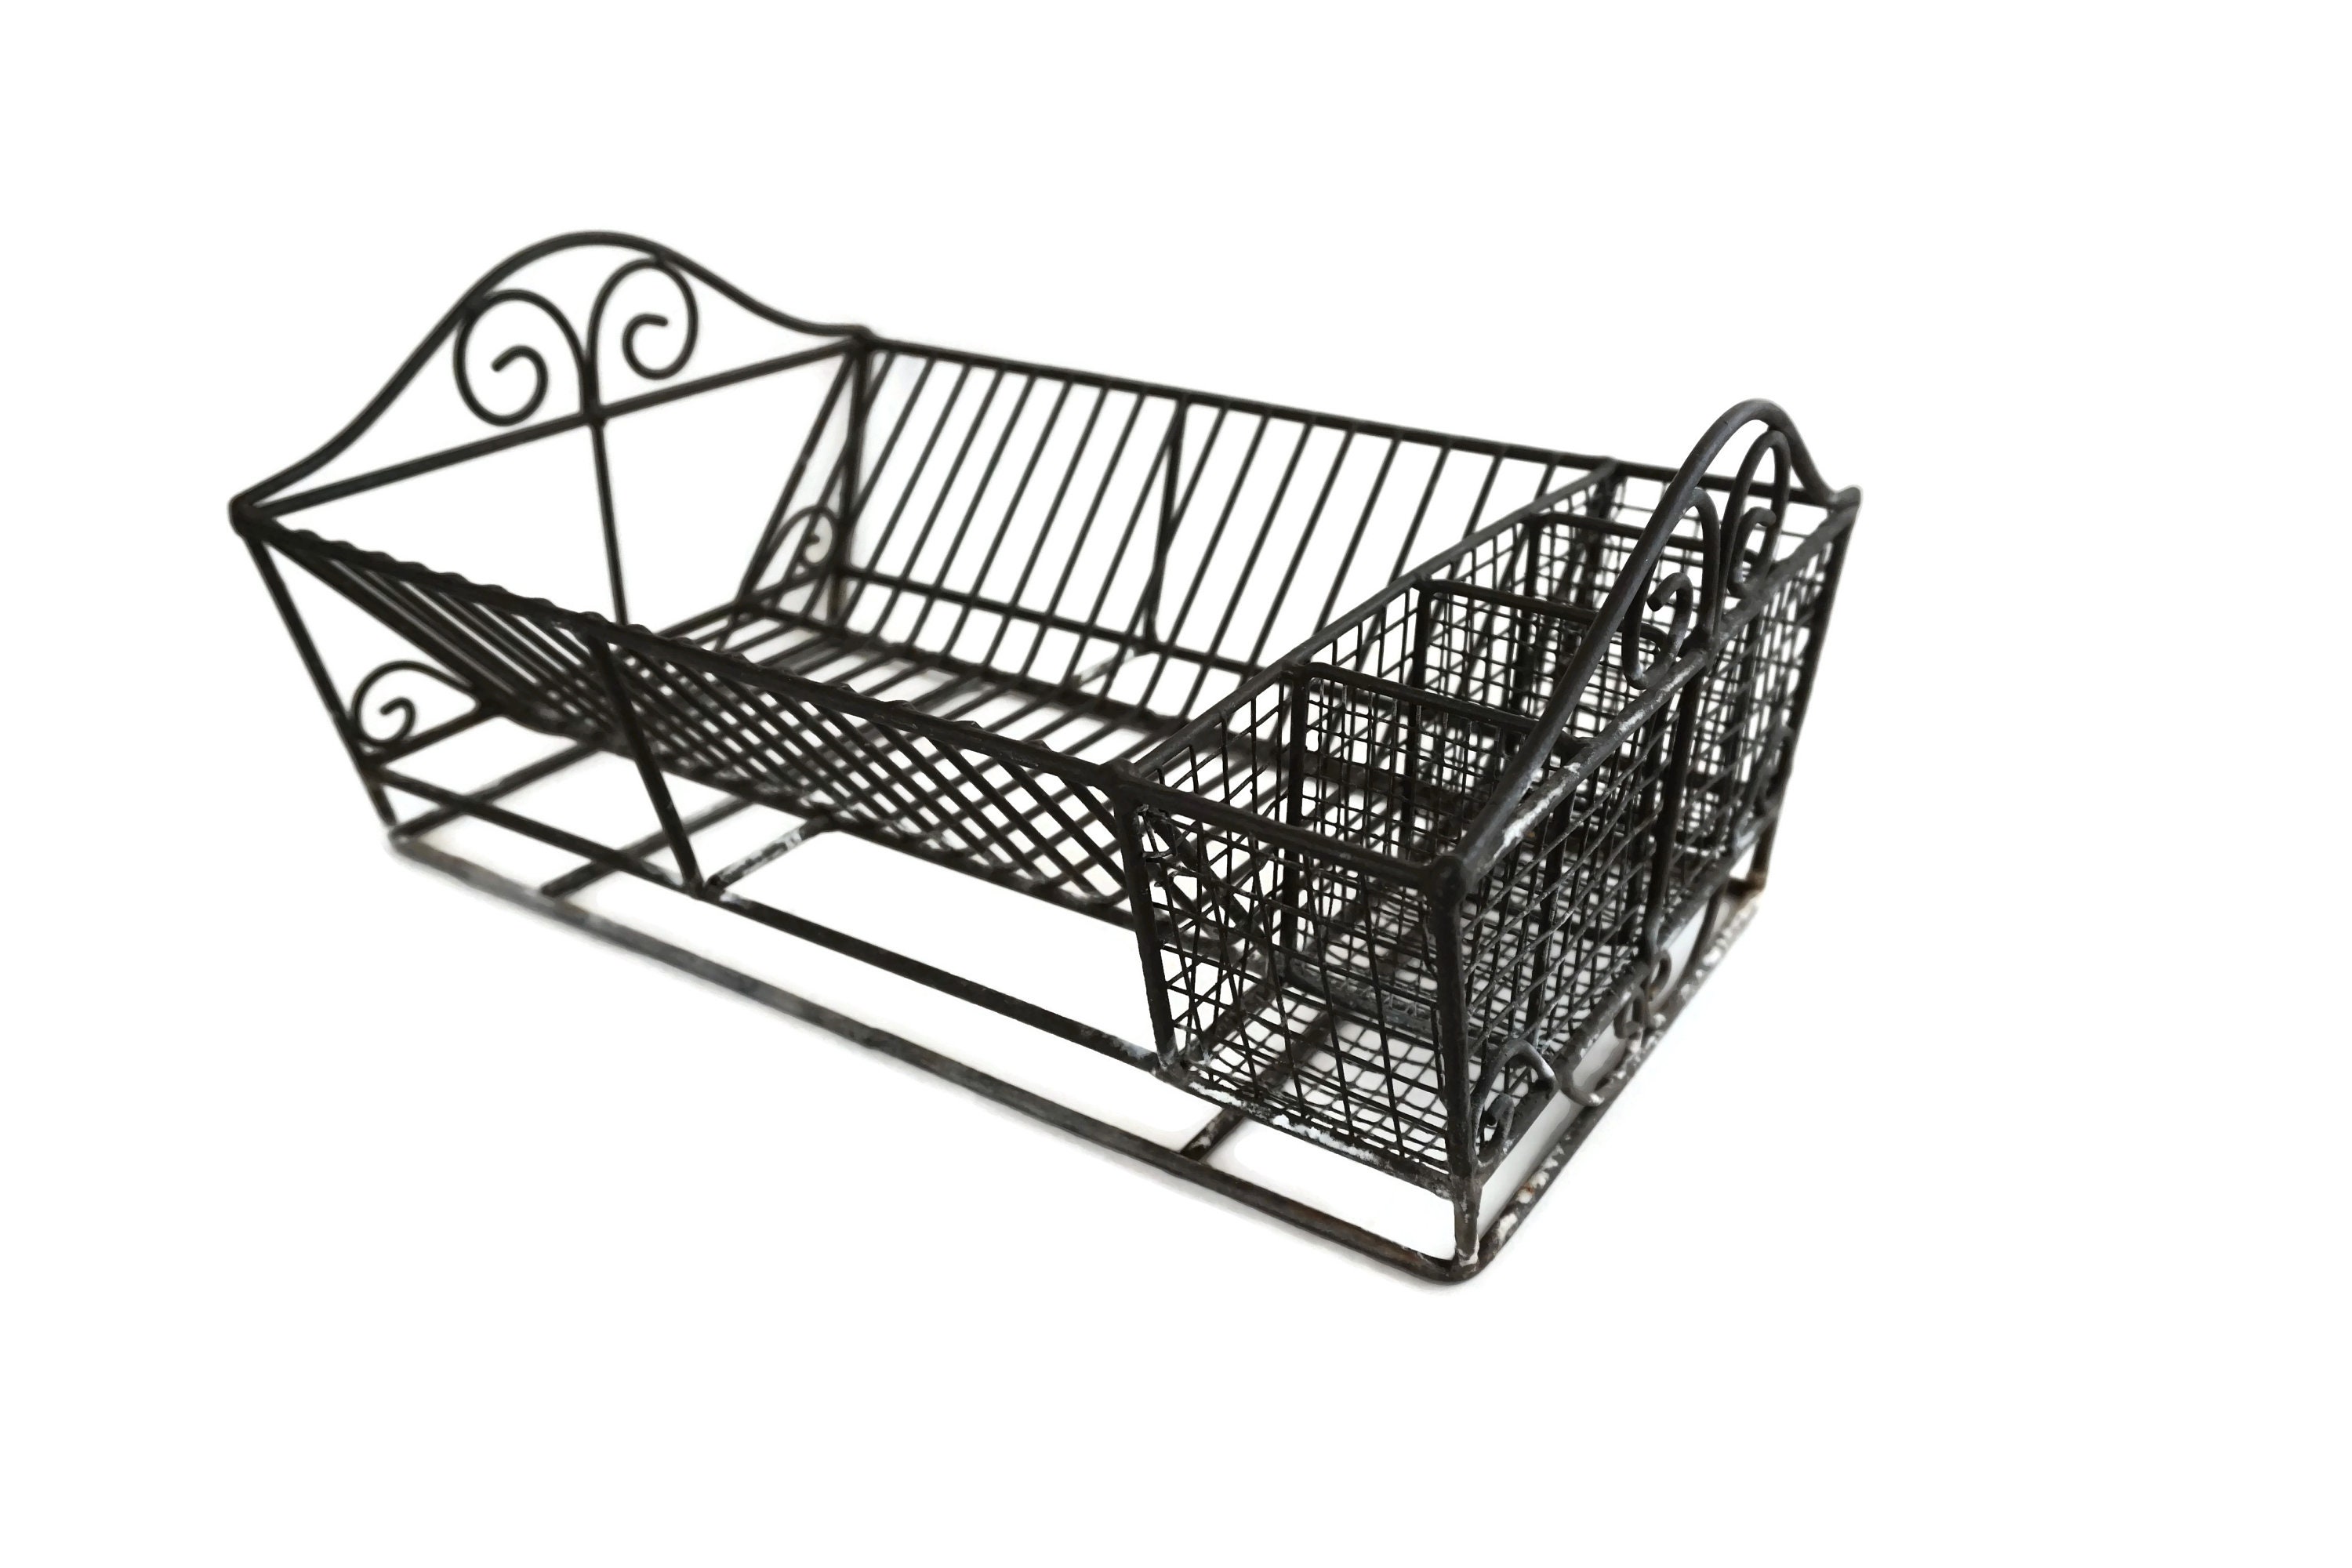 French Dish Rack, Rustic Metal Wire Draining Board Plate Rack, Old Iron  Kitchen Sink Drying Rack, Vintage Country Farmhouse Drying Rack 